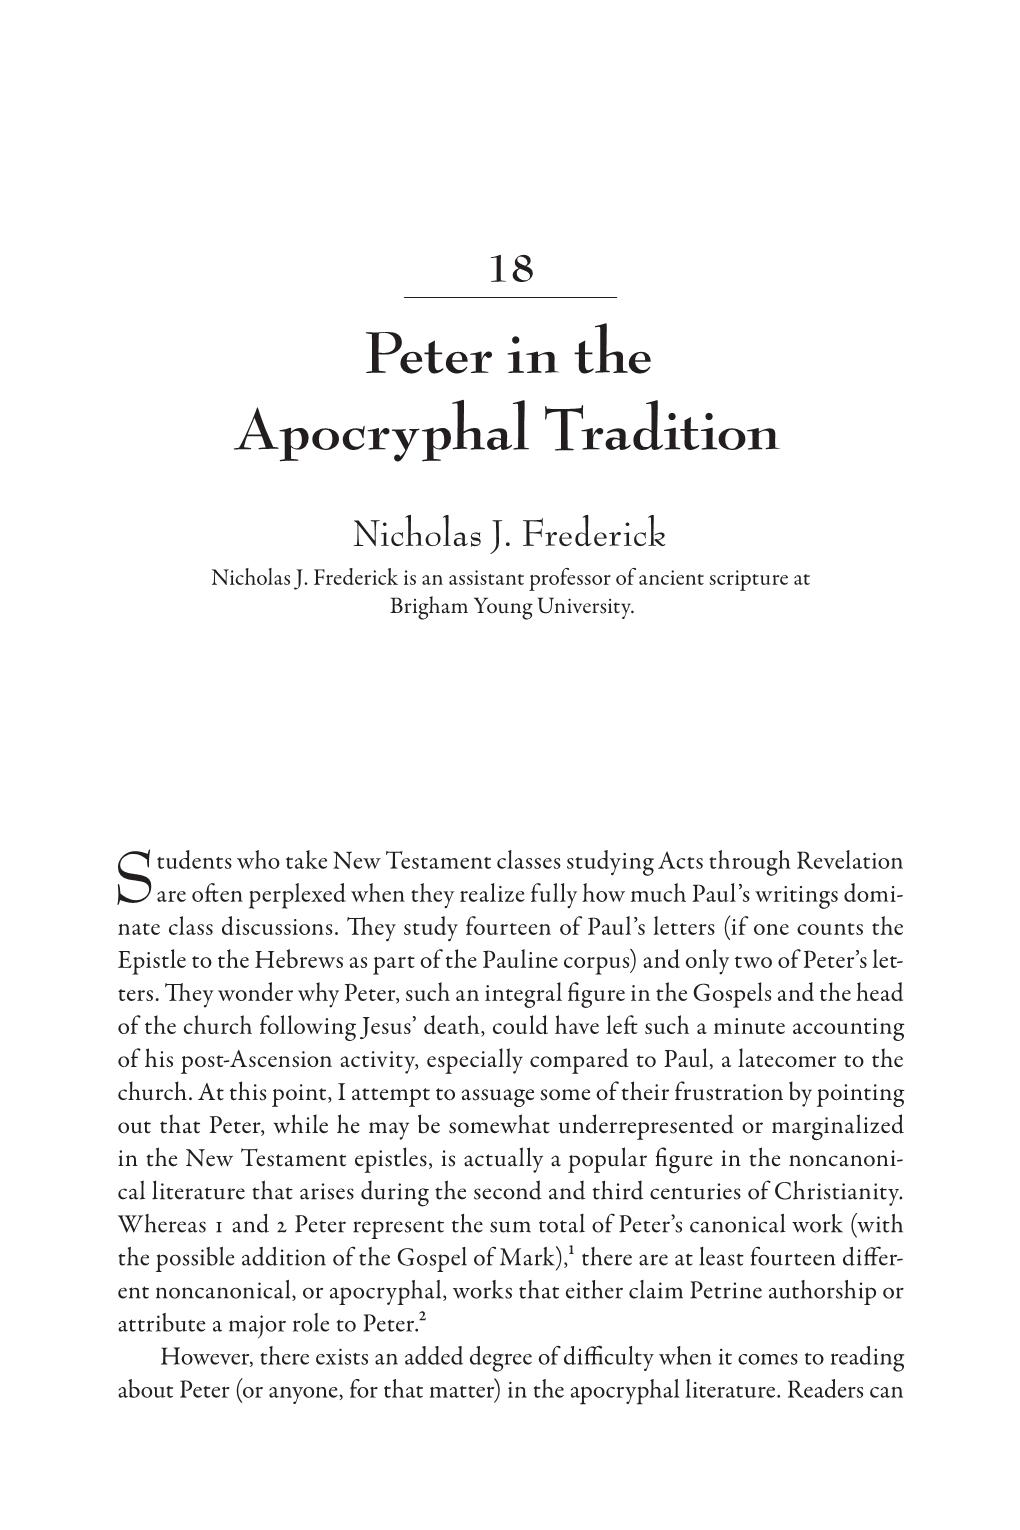 Peter in the Apocryphal Tradition